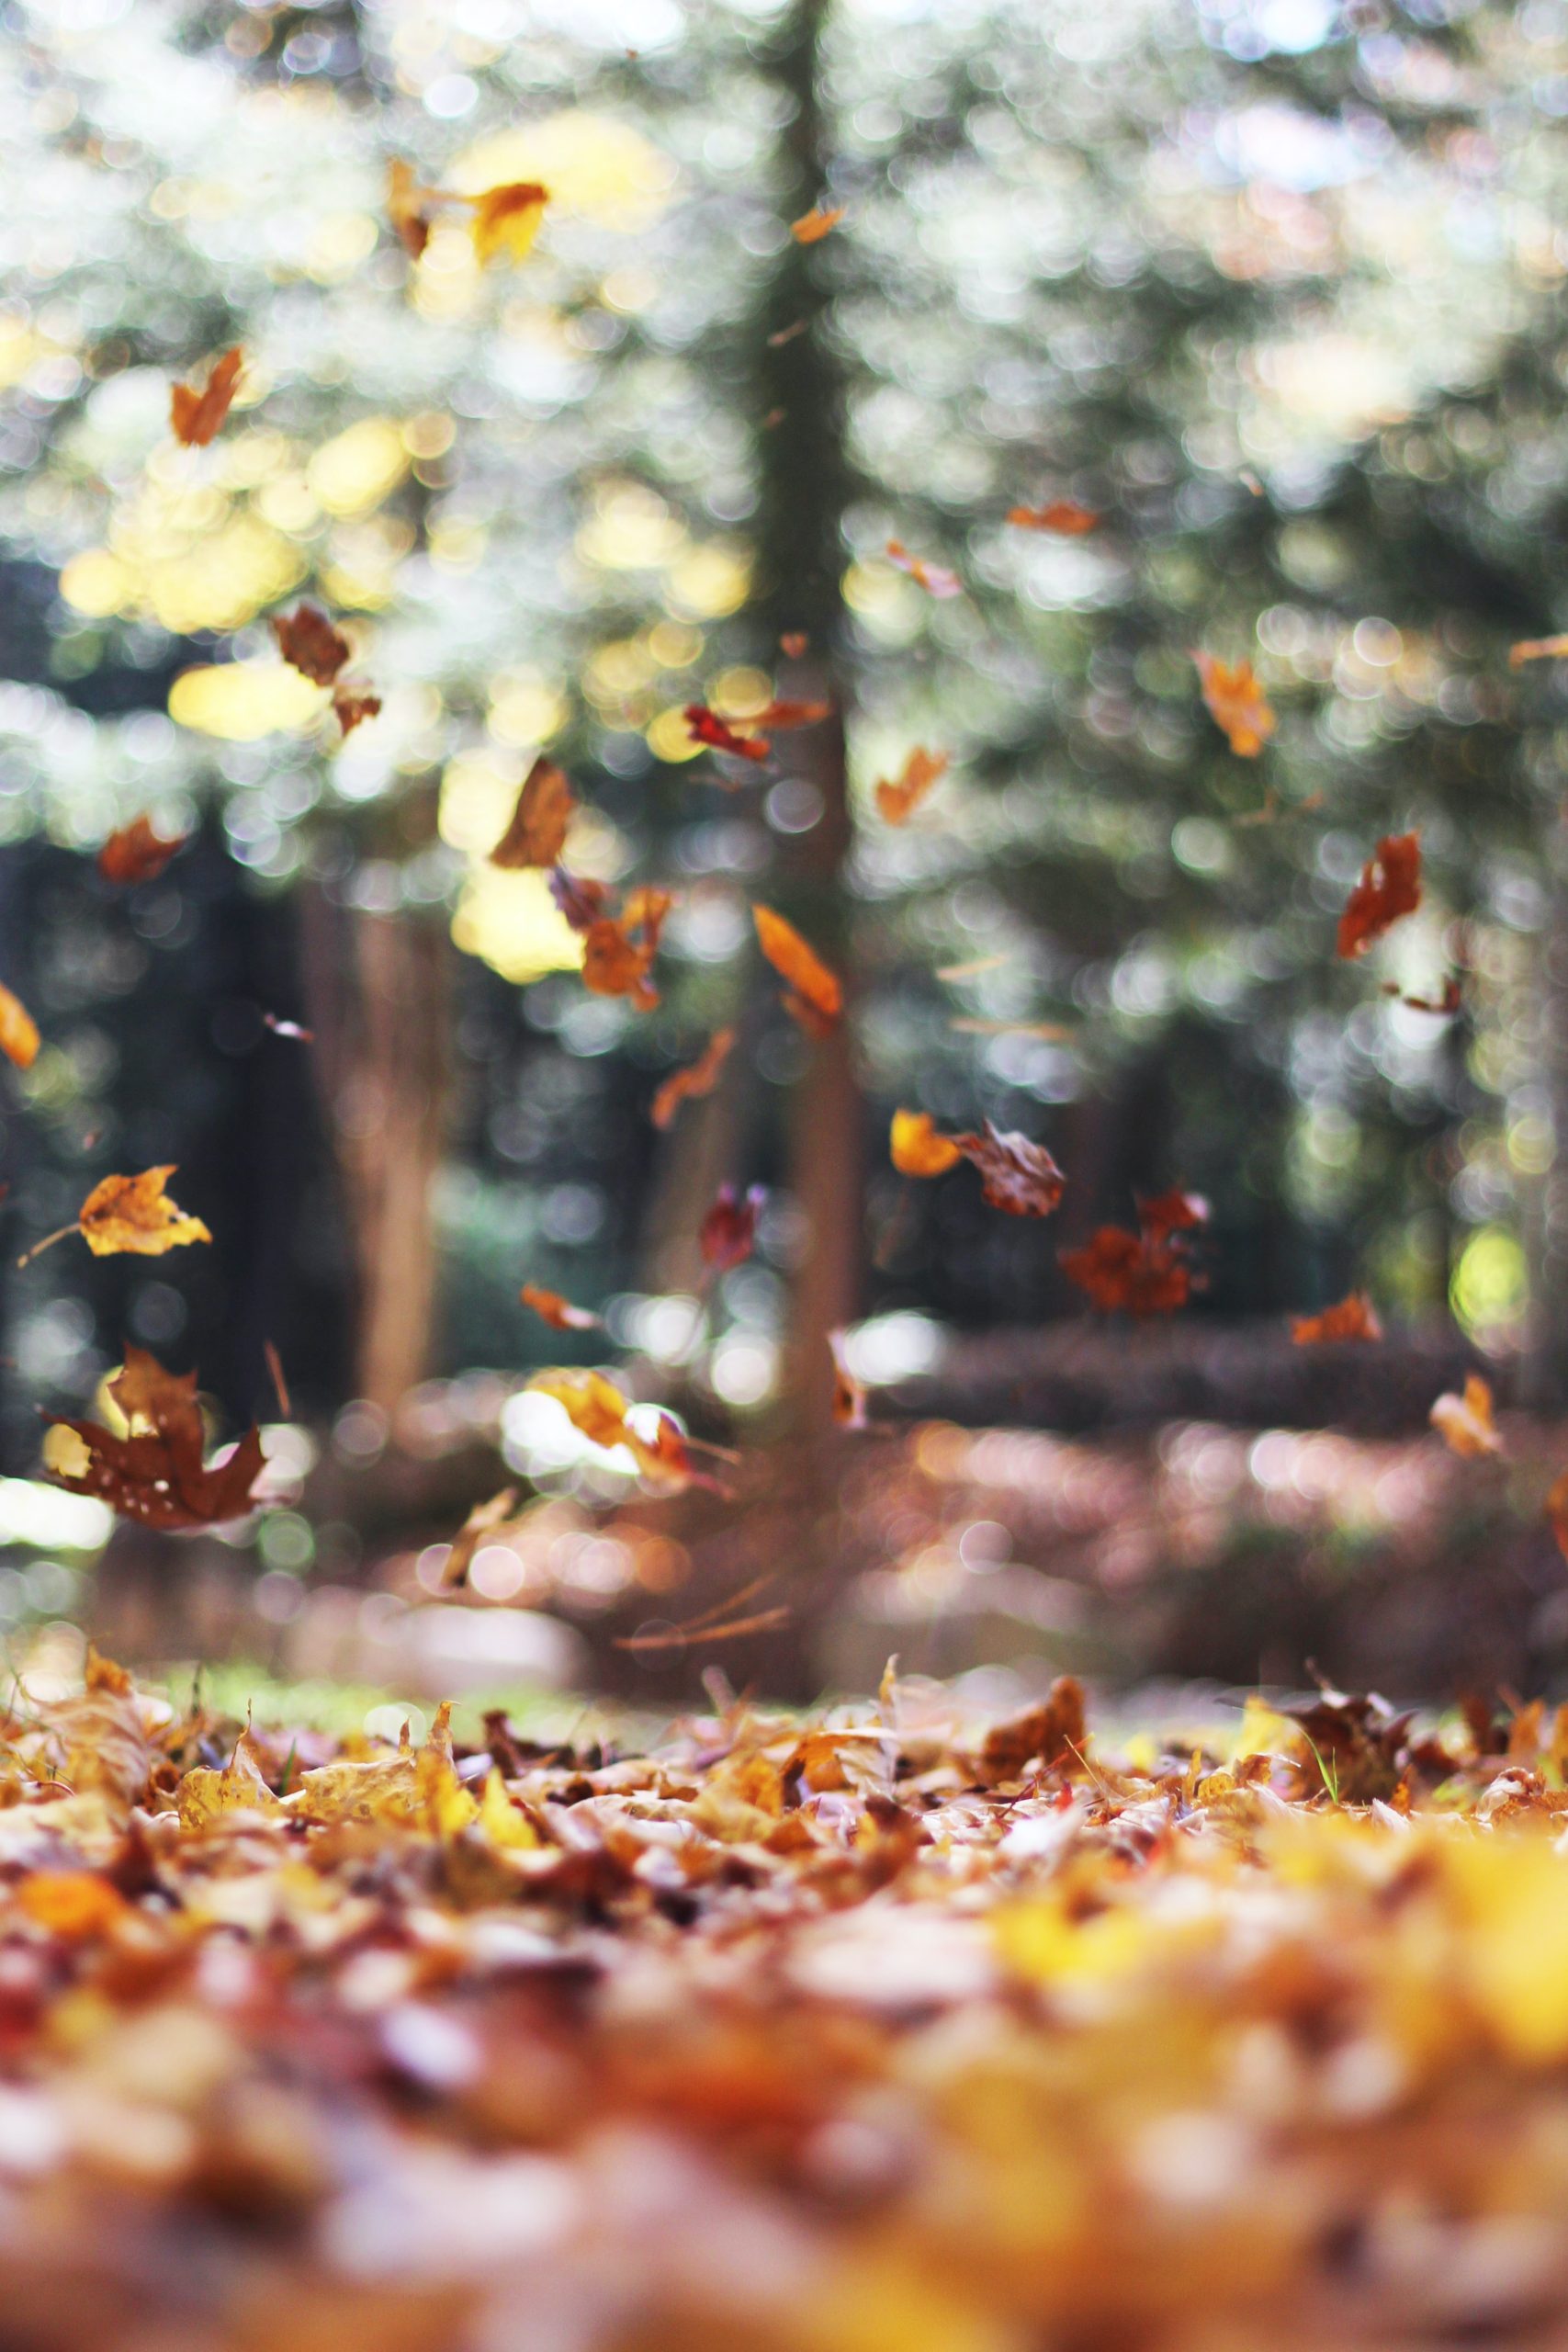 The appeal of autumn: Reasons to Fall in Love with Autumn